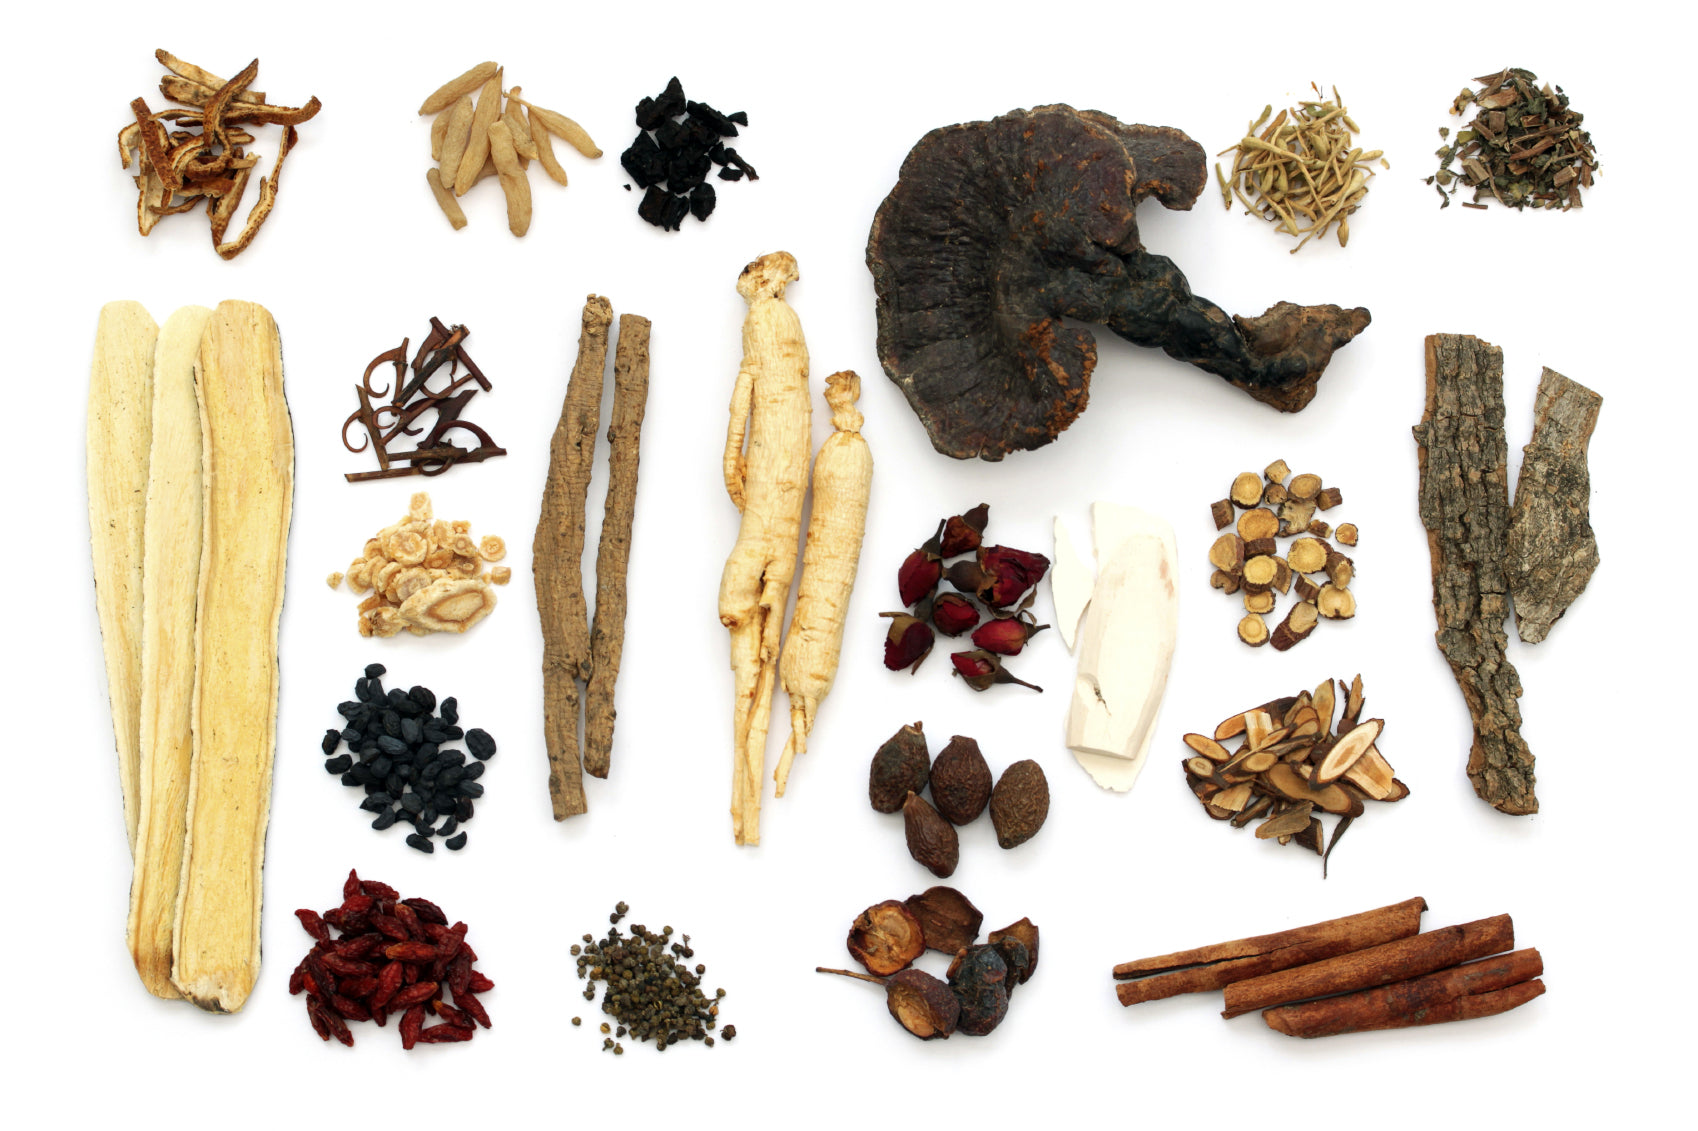 traditional chinese medicine, modern chinese medicine, tcm practitioner, chinese medicine practitioner, traditional chinese medicine herbs, ancient chinese medicine, tcm herbs, tcm medicine, traditional chinese medicine 